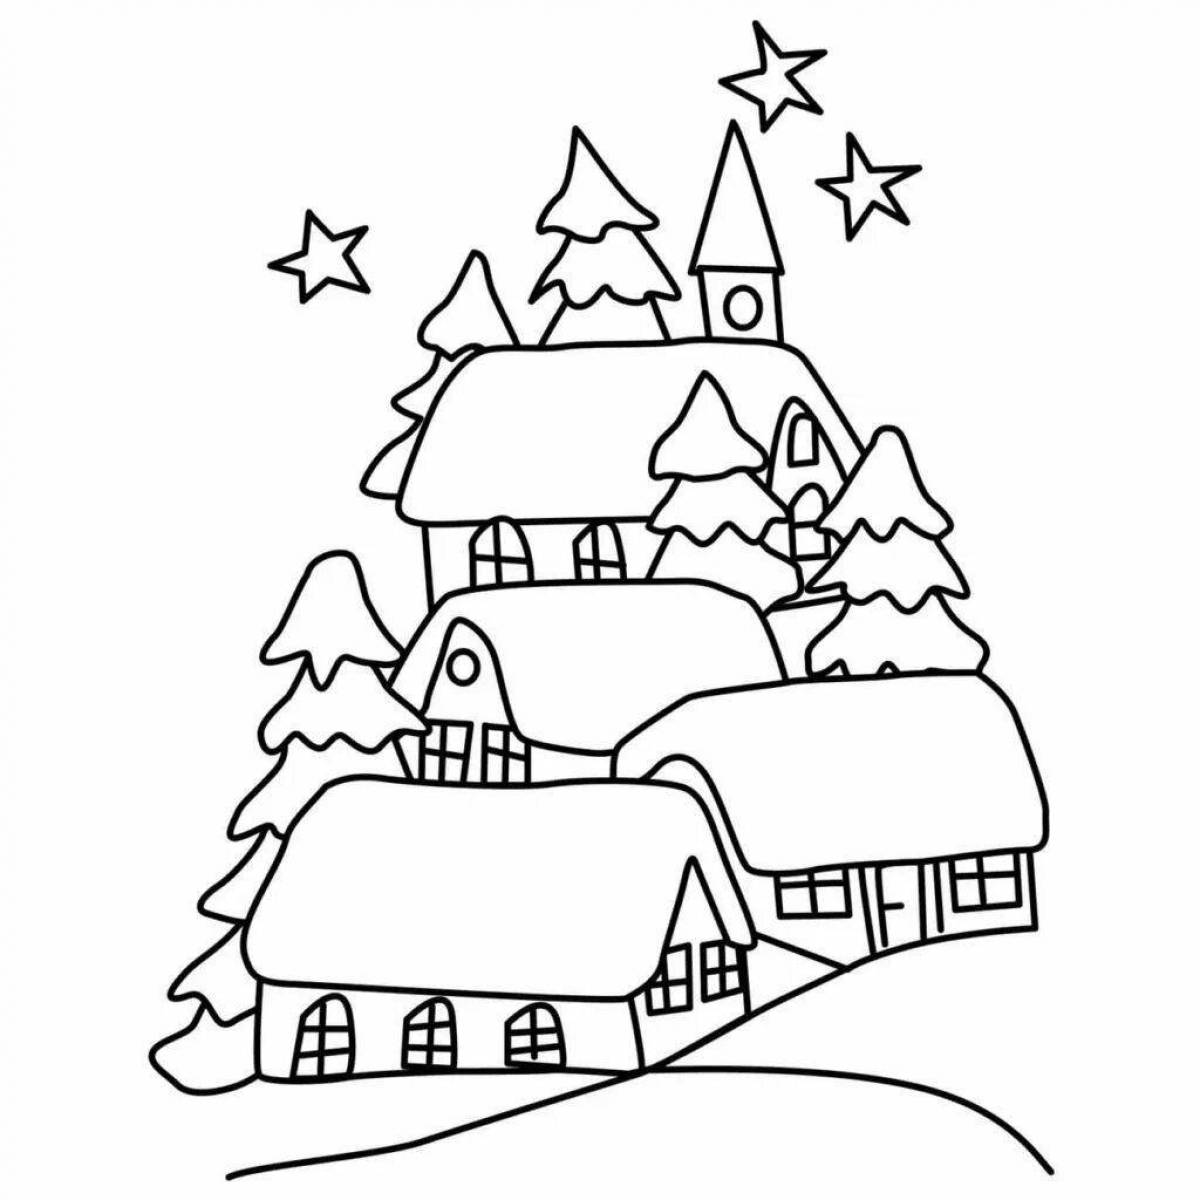 Colouring a gorgeous winter house for kids